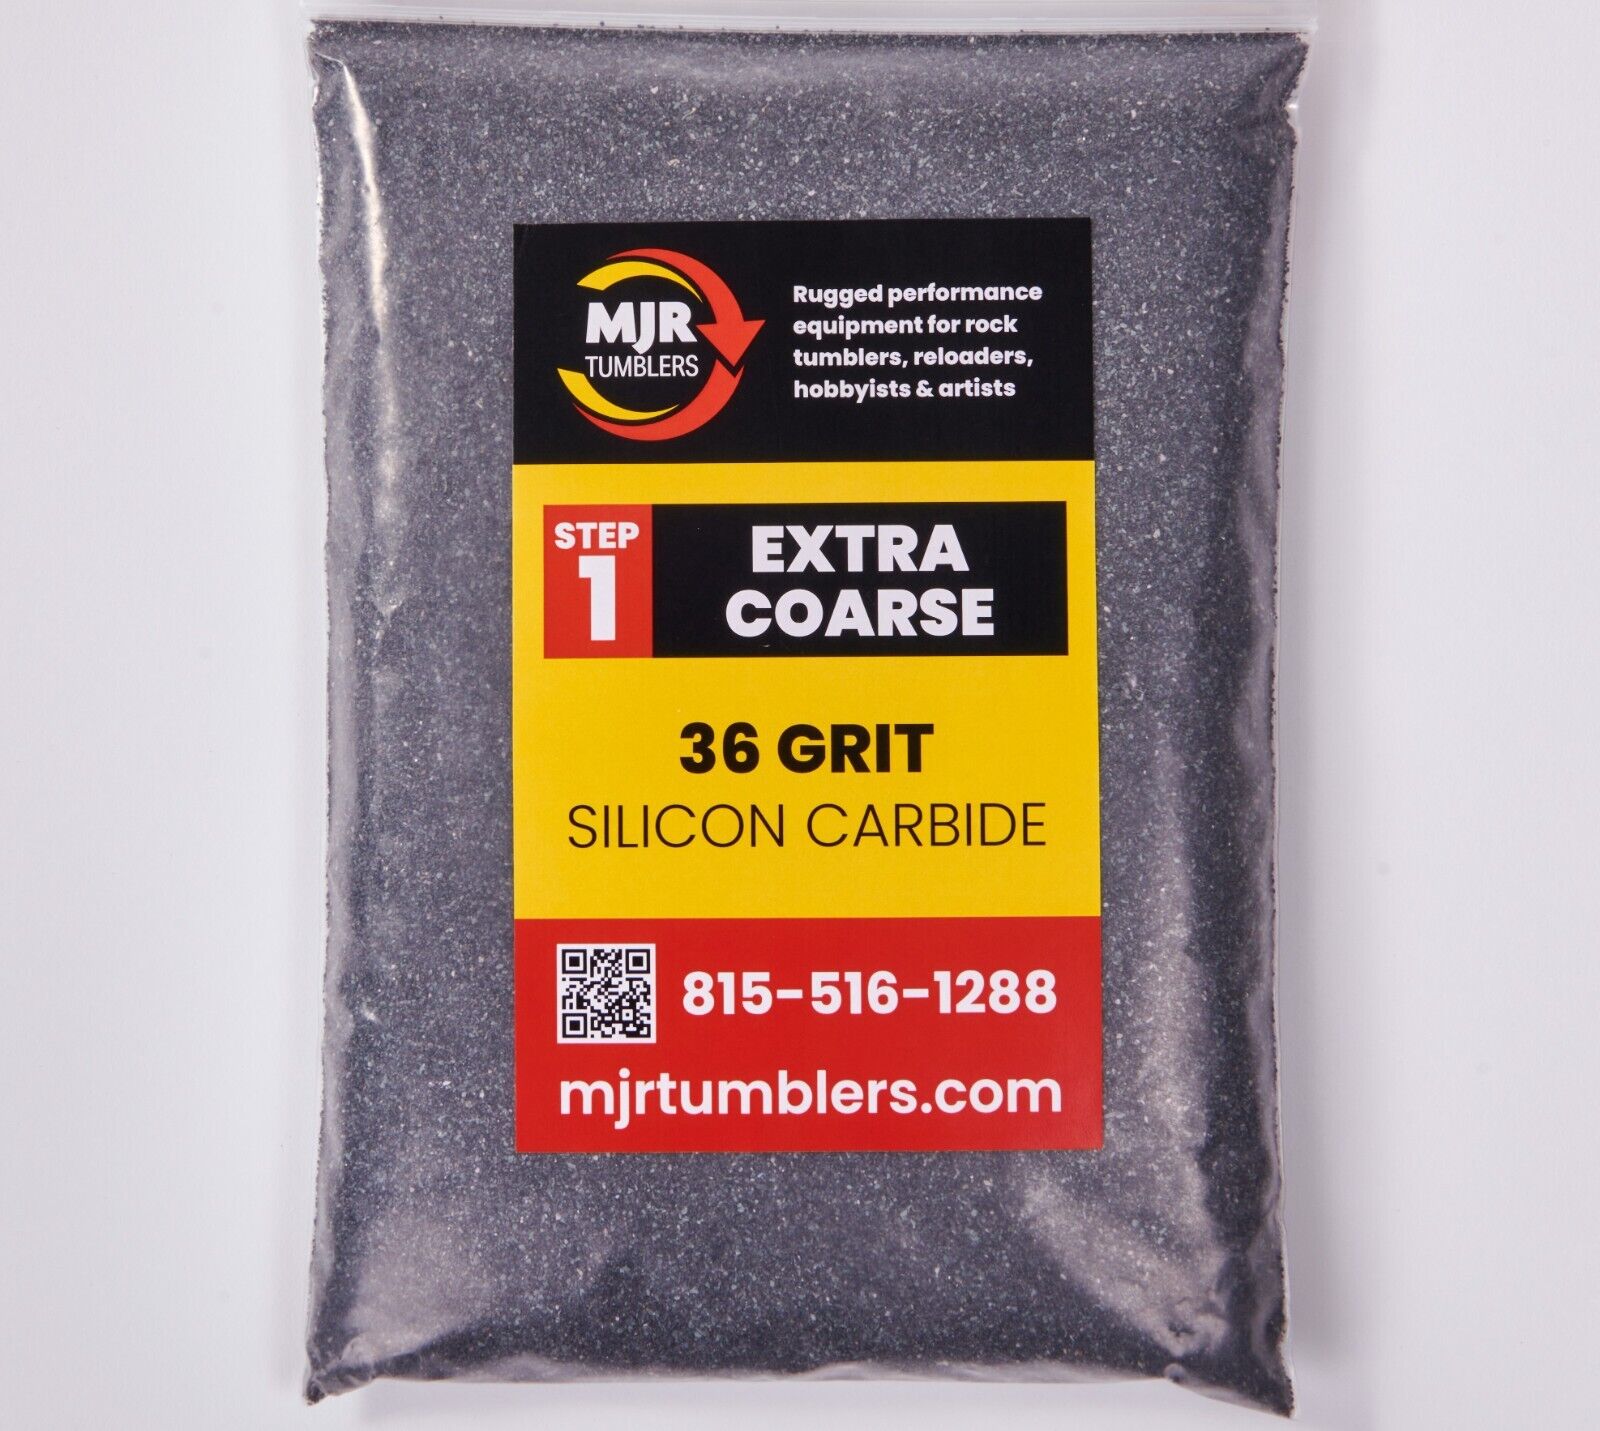 2 lb of 36 Grit Extra Coarse Rock Tumbling Silicon Carbide for Lapidary use